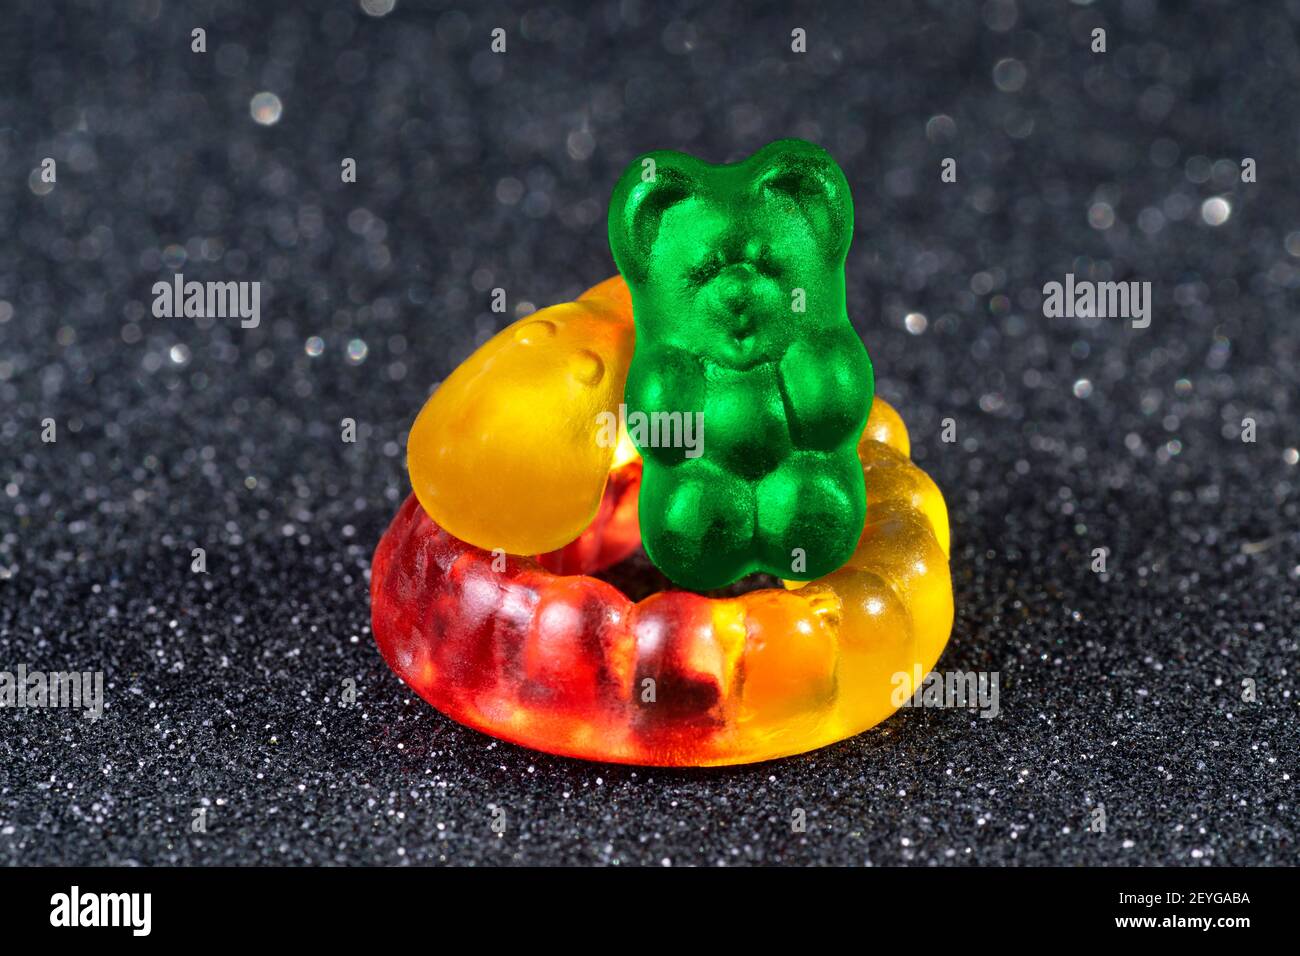 Close-up of a green gummy bear sitting on a curled yellow-red gummy worm on a glittering blurred background. Stock Photo